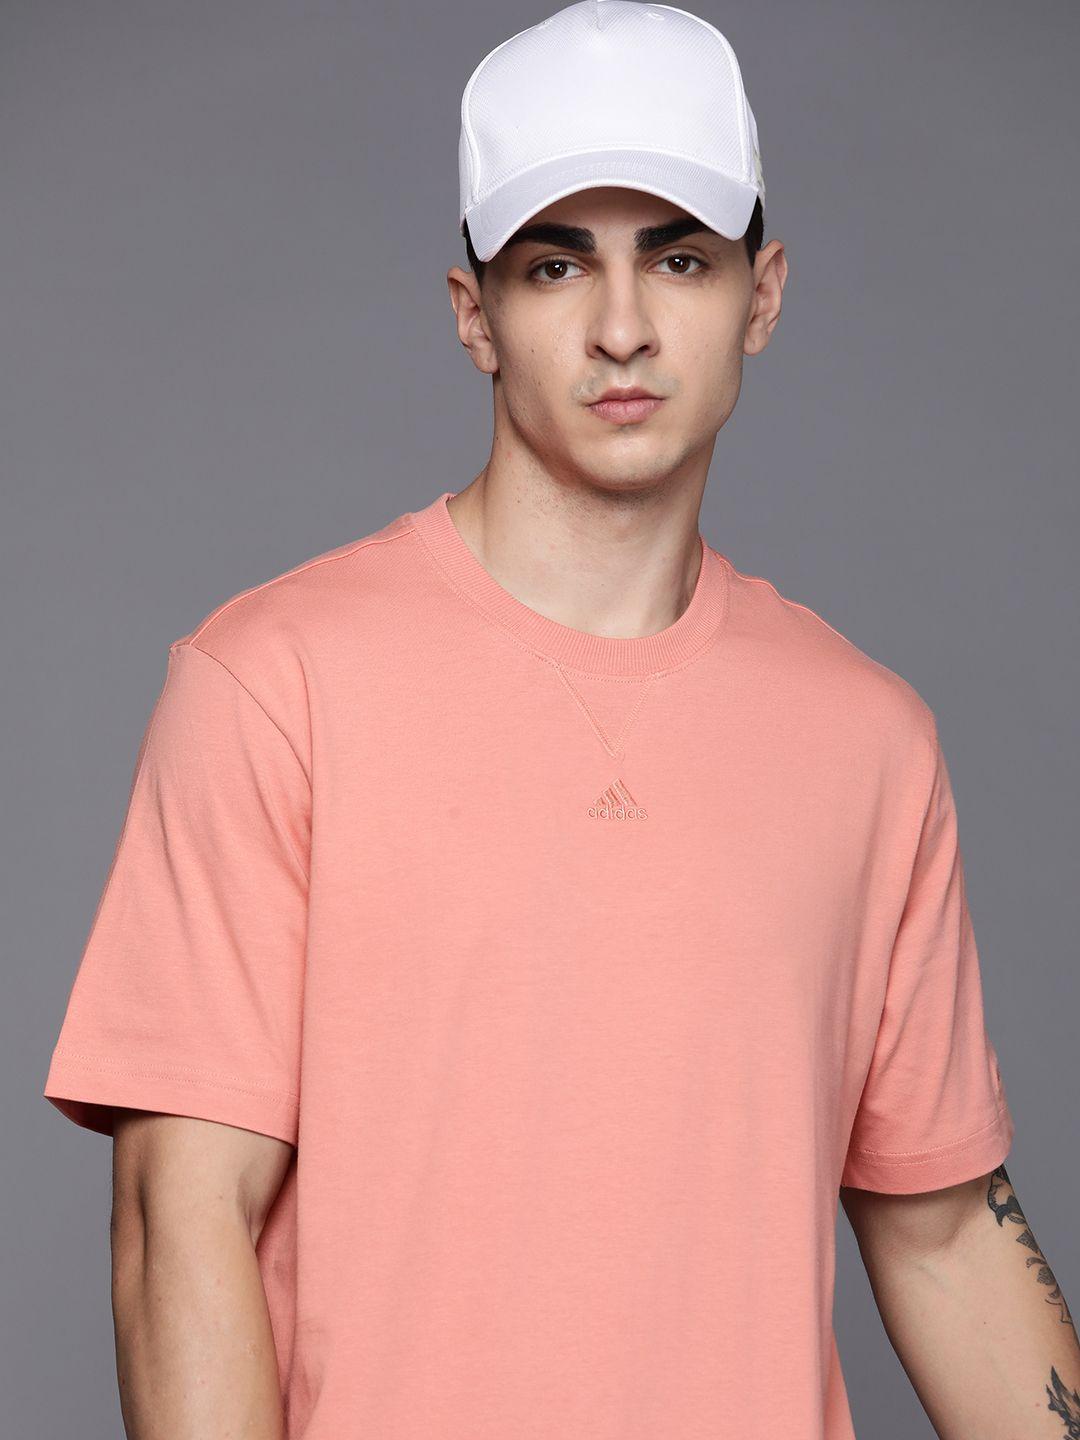 adidas all szn pure cotton loose fit t-shirt